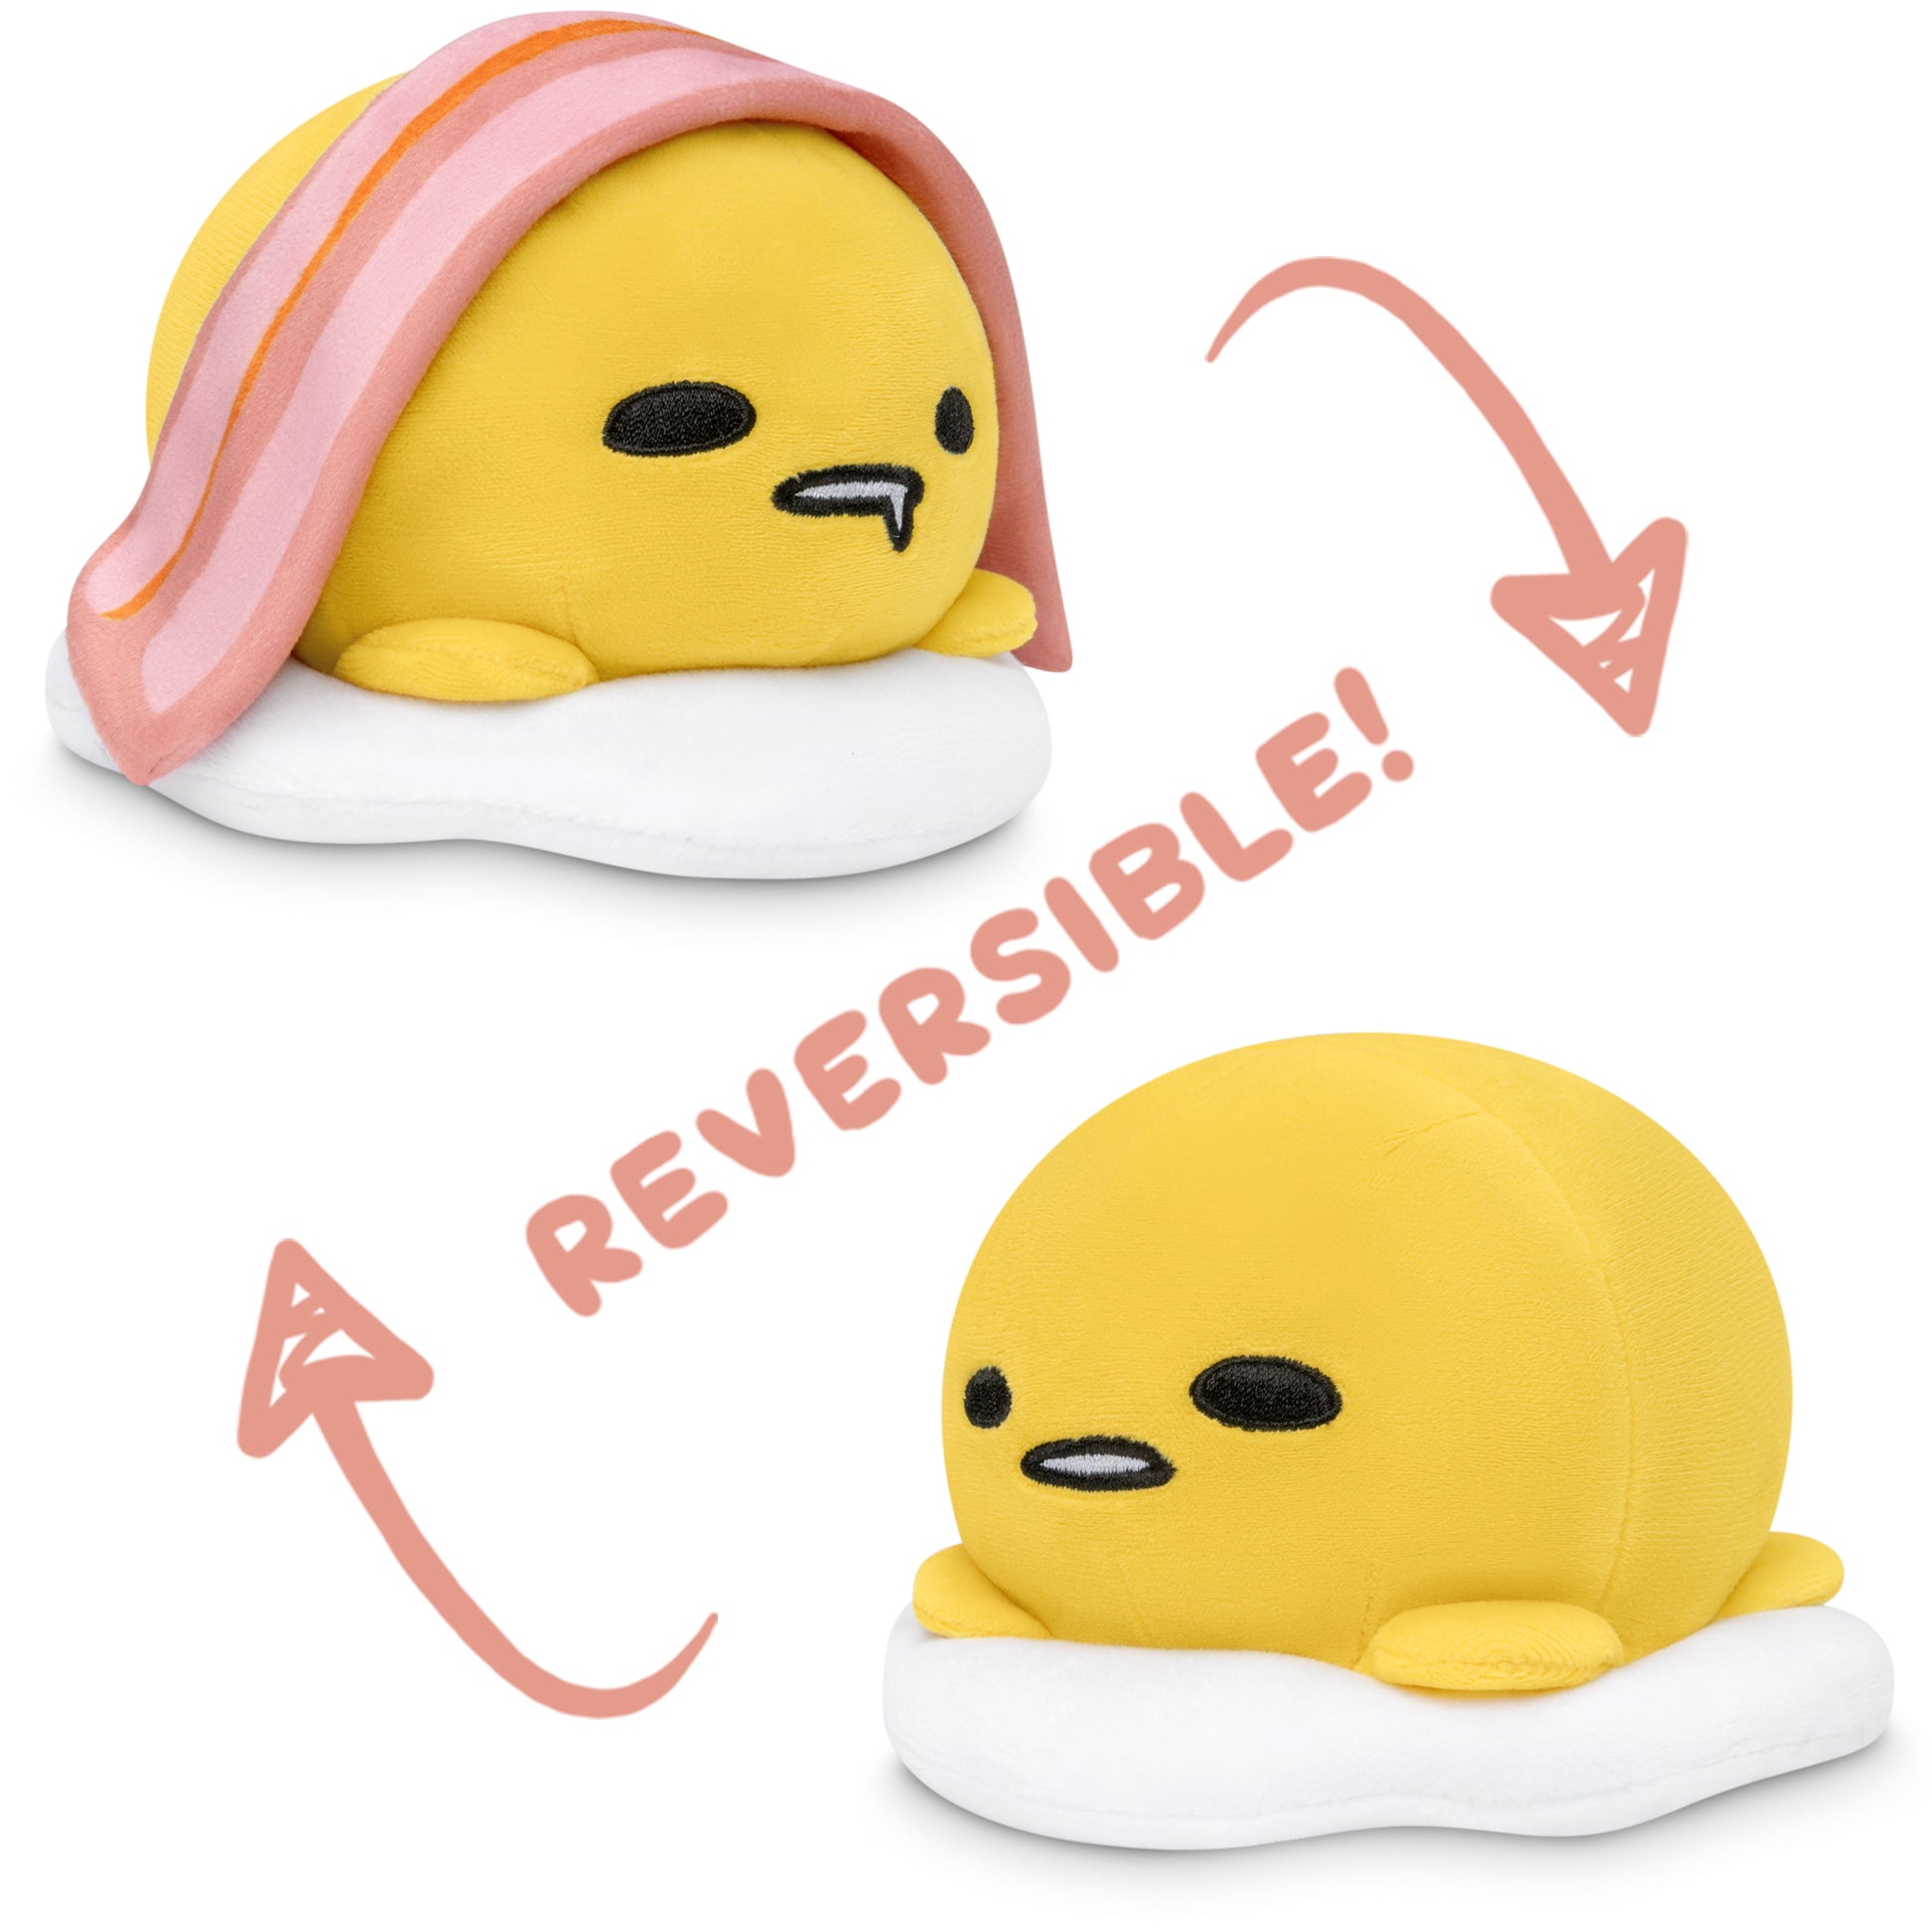 TeeTurtle offers a variety of mood plushies, including the popular TeeTurtle Reversible Gudetama Plushie. With its reversible design, this adorable plushie allows you to switch between Gudetama.